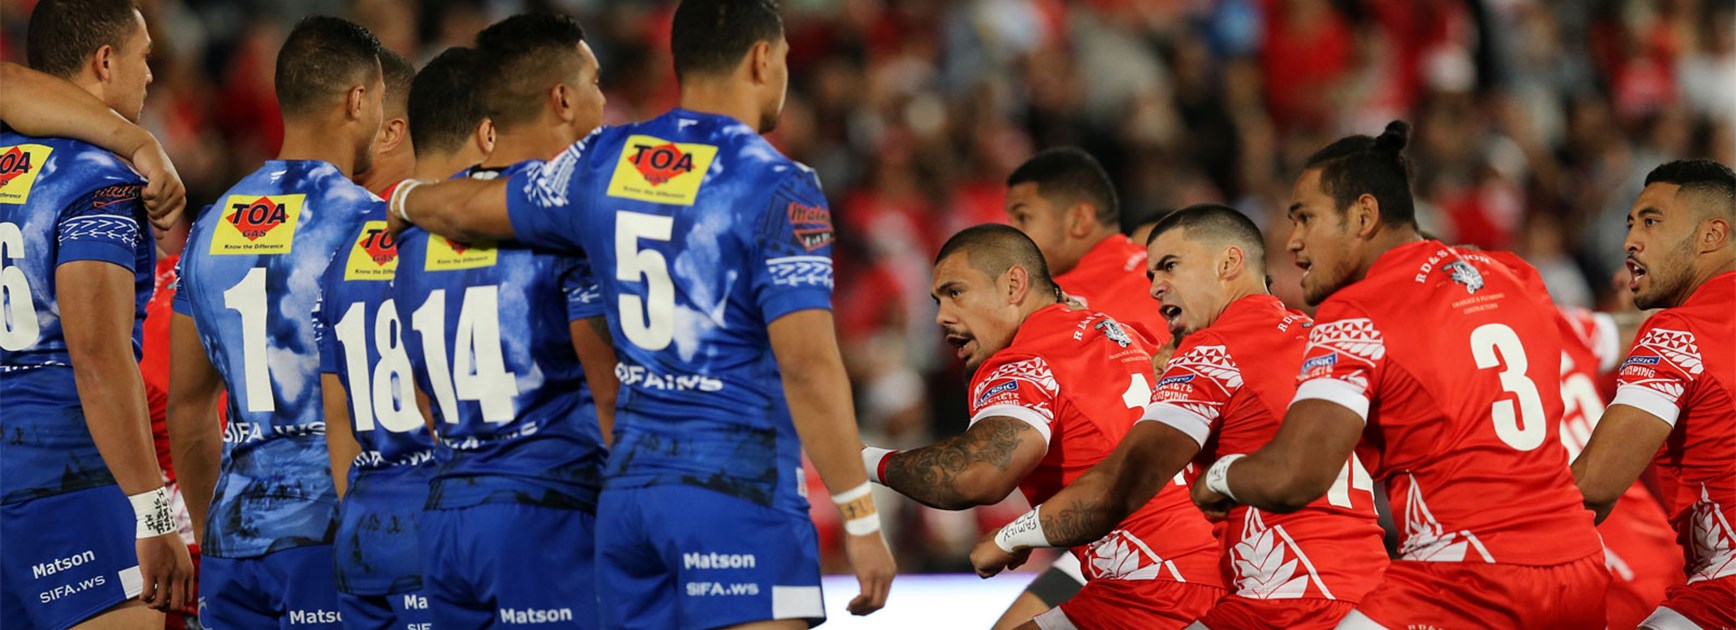 Samoa face off against Tonga's pre-game war dance on Saturday.